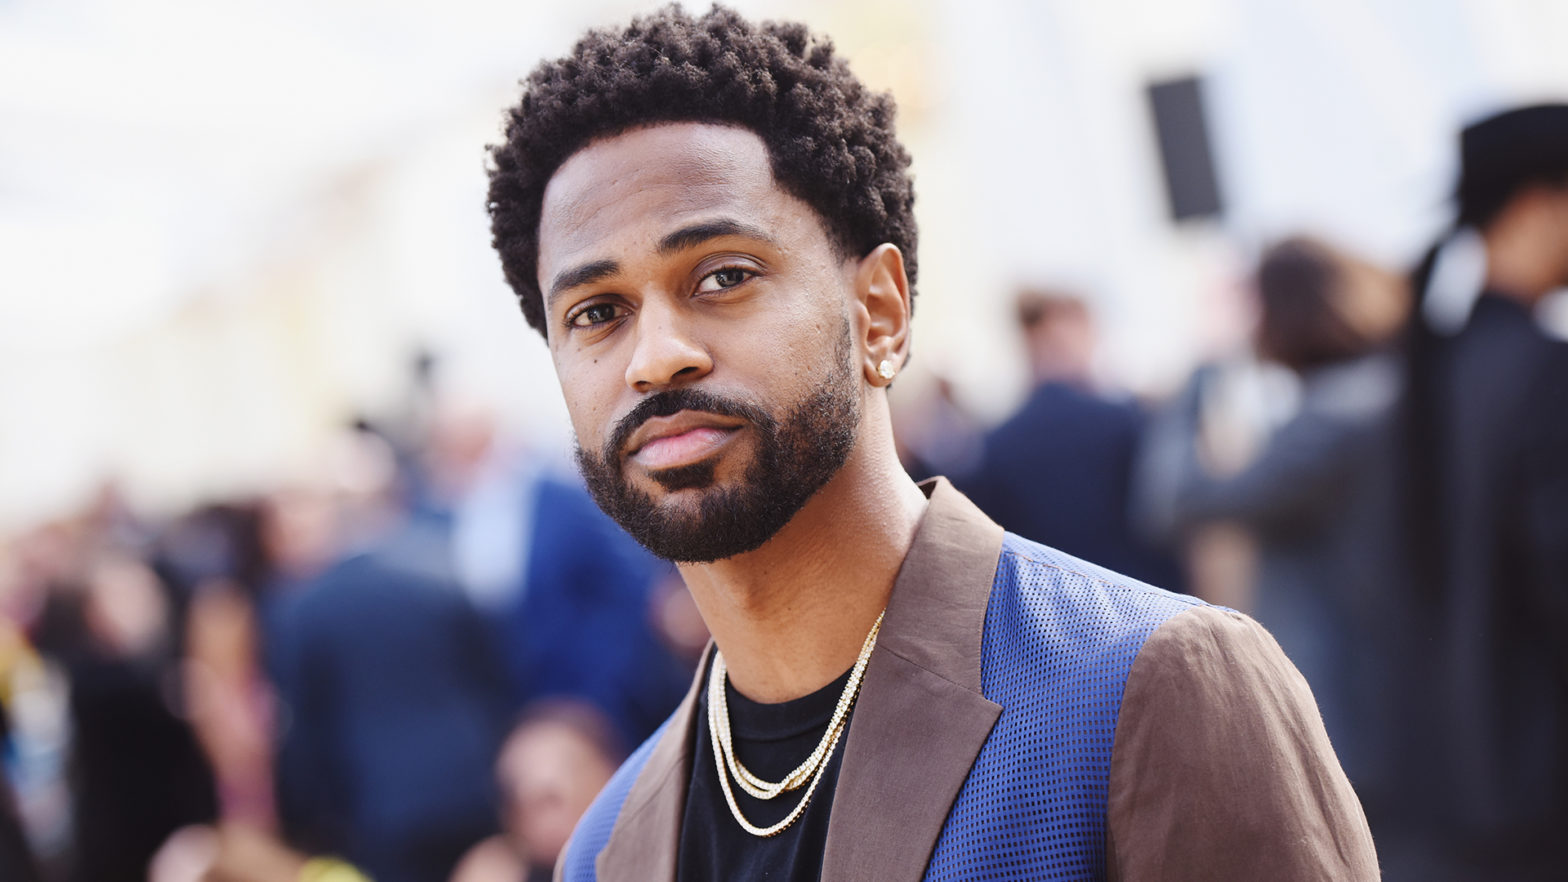 Big Sean Teams Up With Ally Financial To Bring Financial Literacy Game Created By HBCU Students To Life